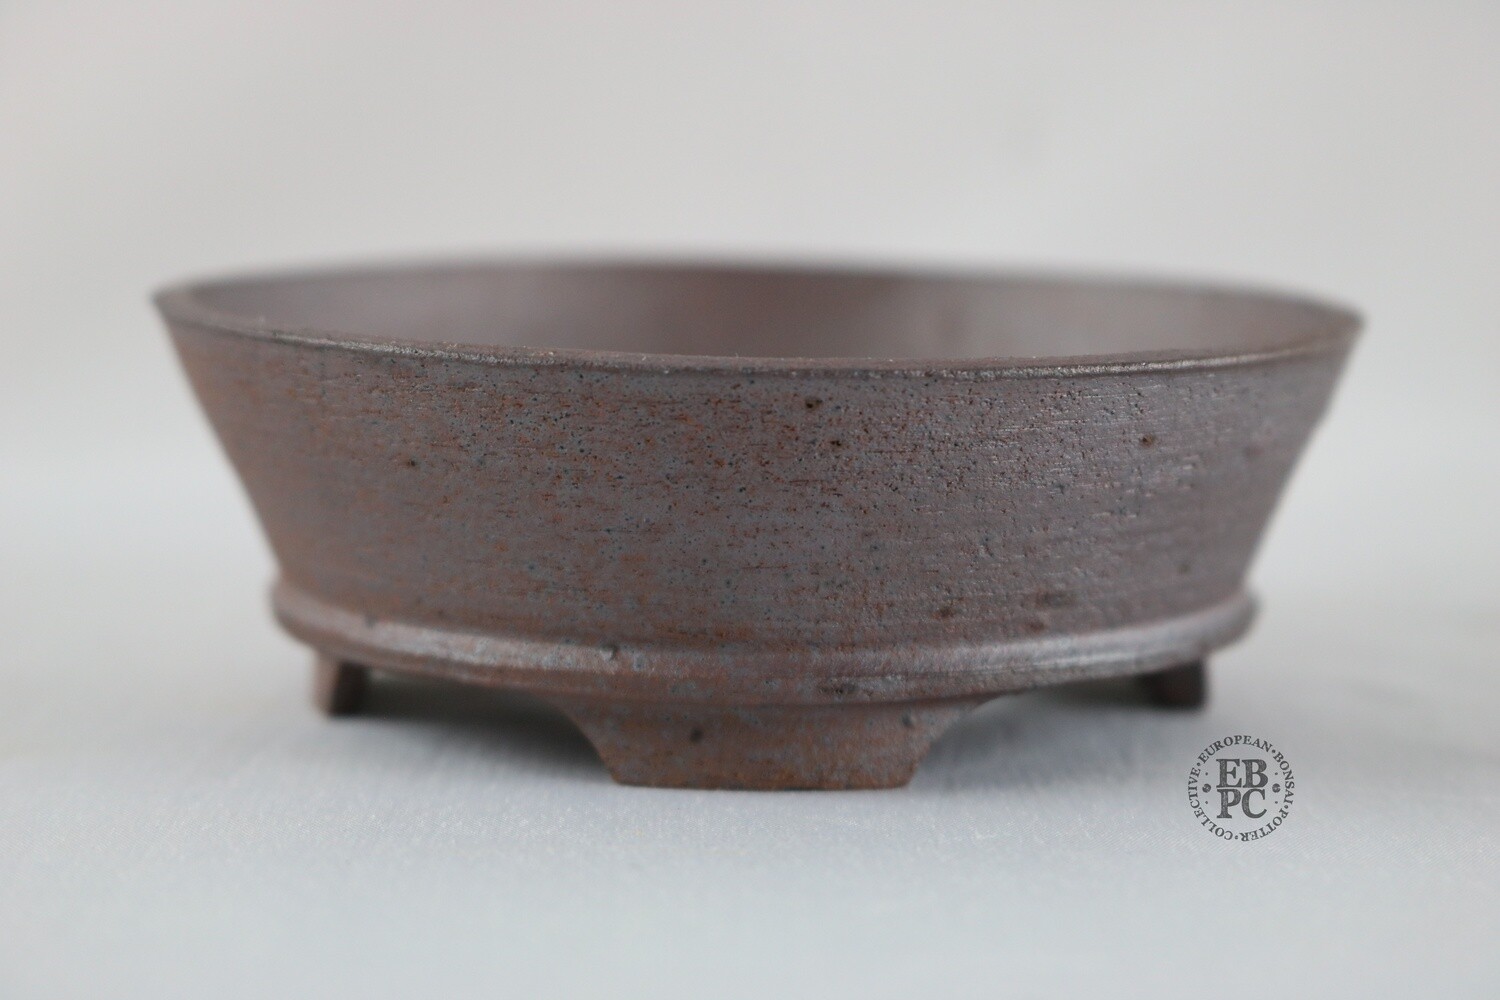 Gramming Pots - 9.2cm; Wood-Fired; Accent / Mame Pot; Ash Deposits; Formal Design; Recessed Feet; Tomas Gramming.